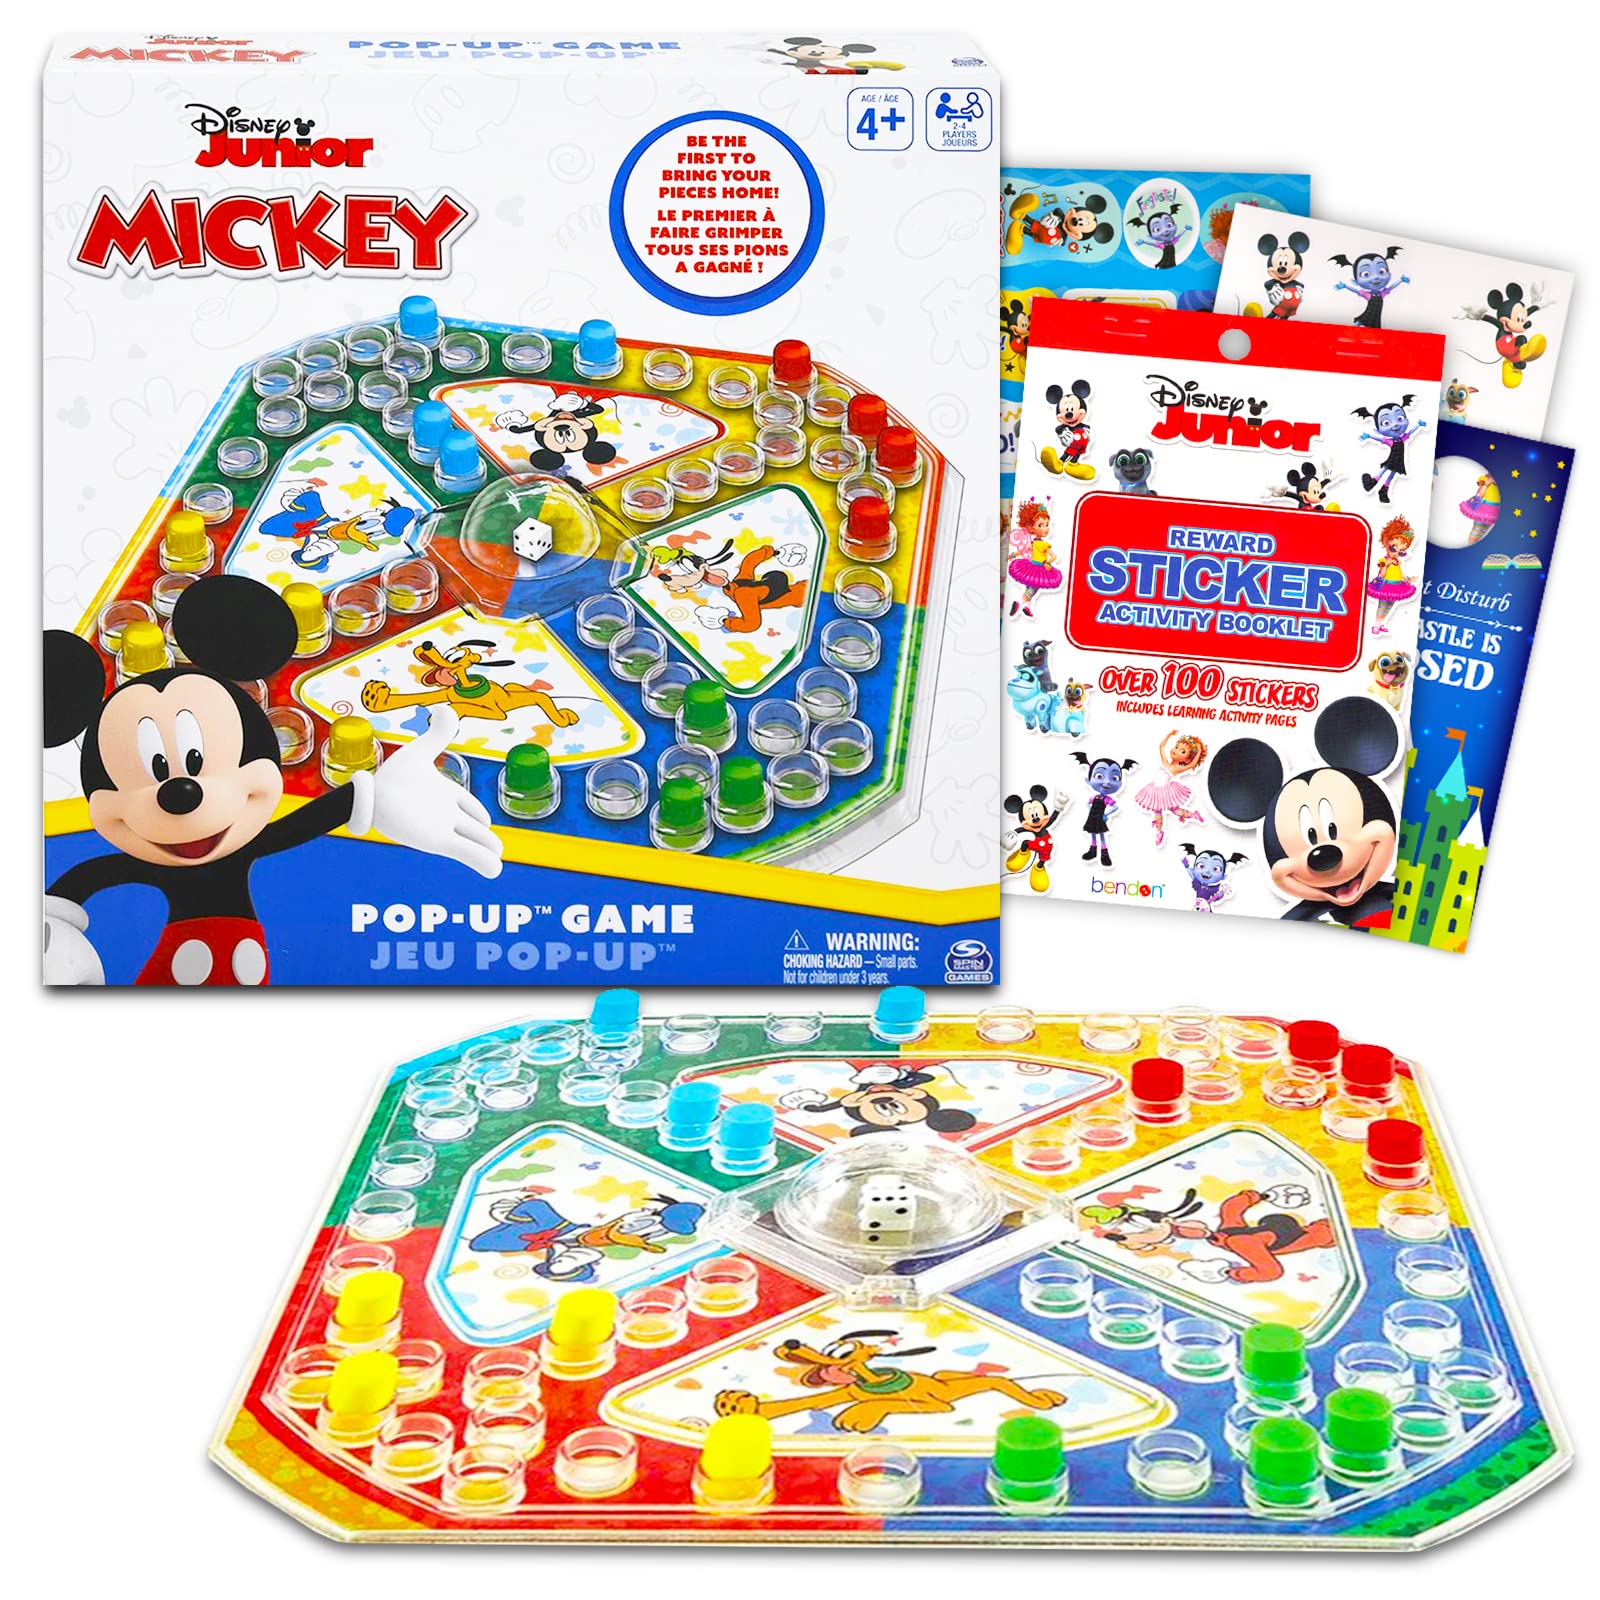 classic Disney Disney Mickey Mouse Pop Up game  3 Pc Bundle with Disney Mickey Mouse Board game for Kids with Pop Up Dice, Stick